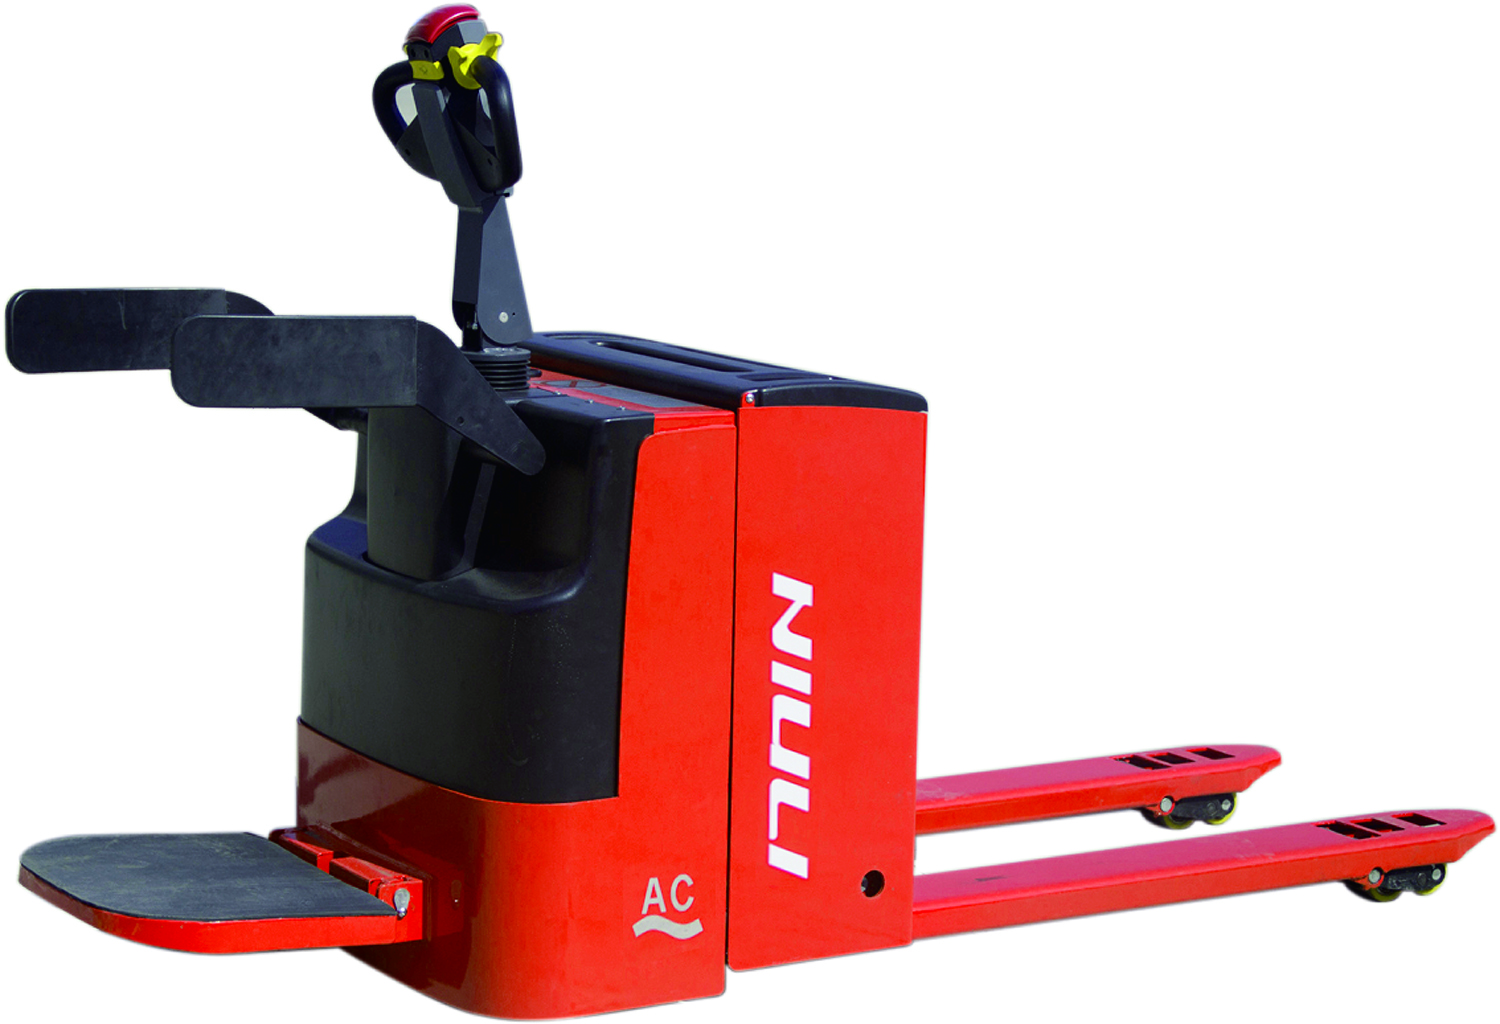 The Importance of Proper Training for Electric Pallet Jacks